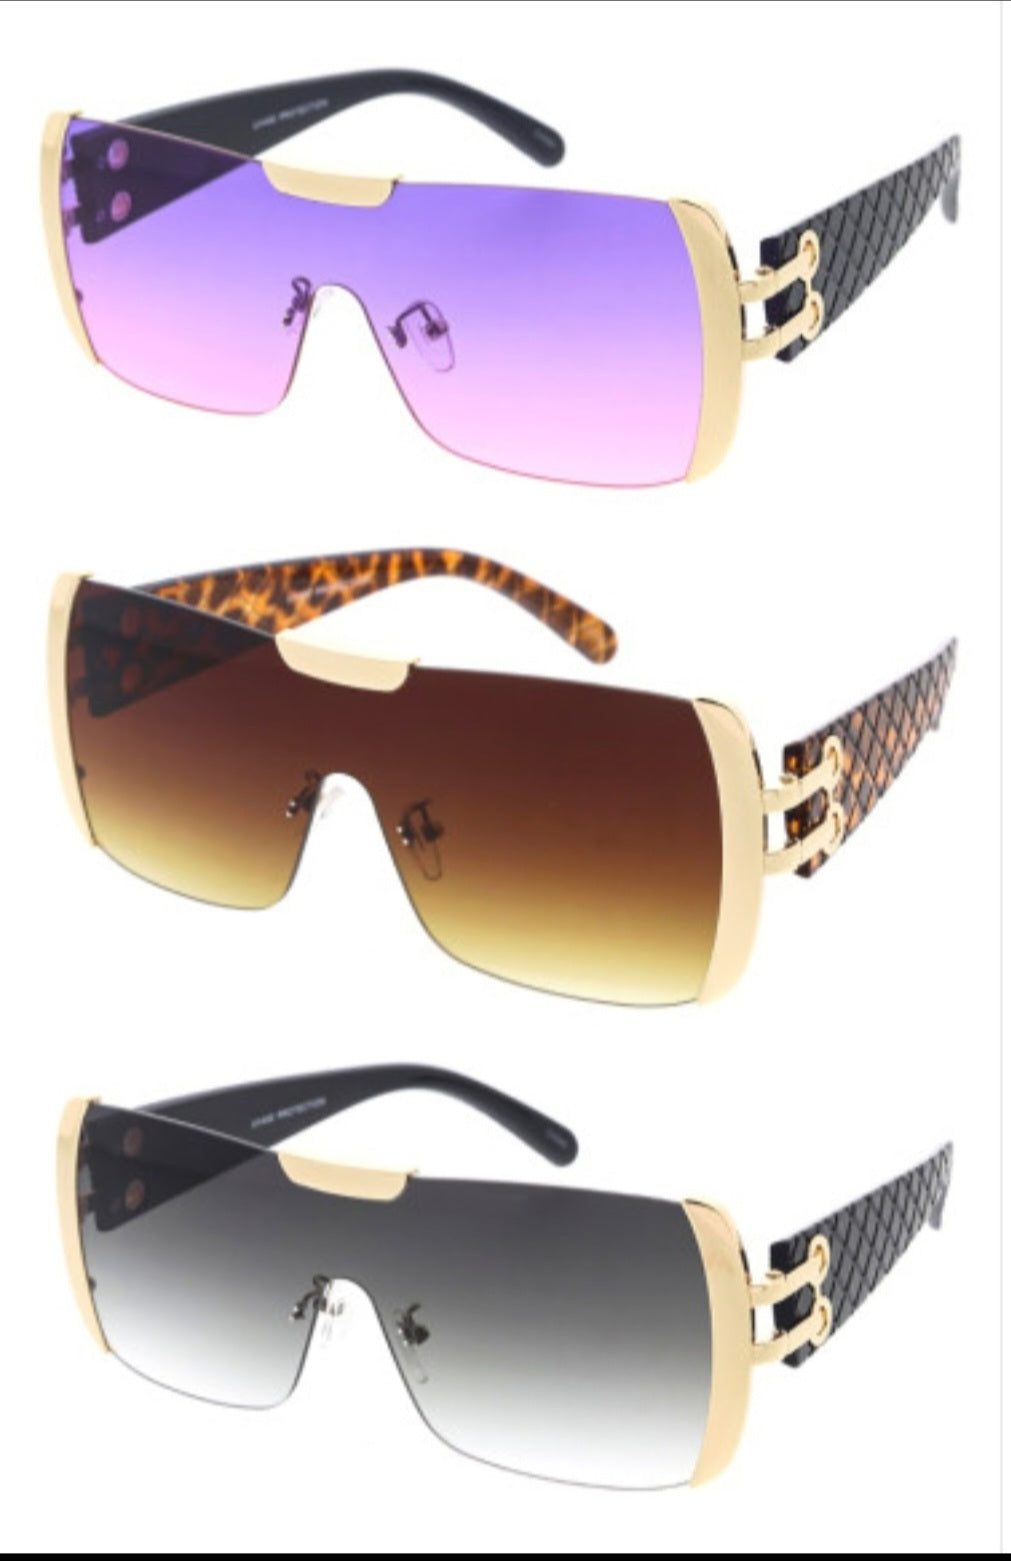 Women's Oversized Luxury Sunglasses with Gold Sides